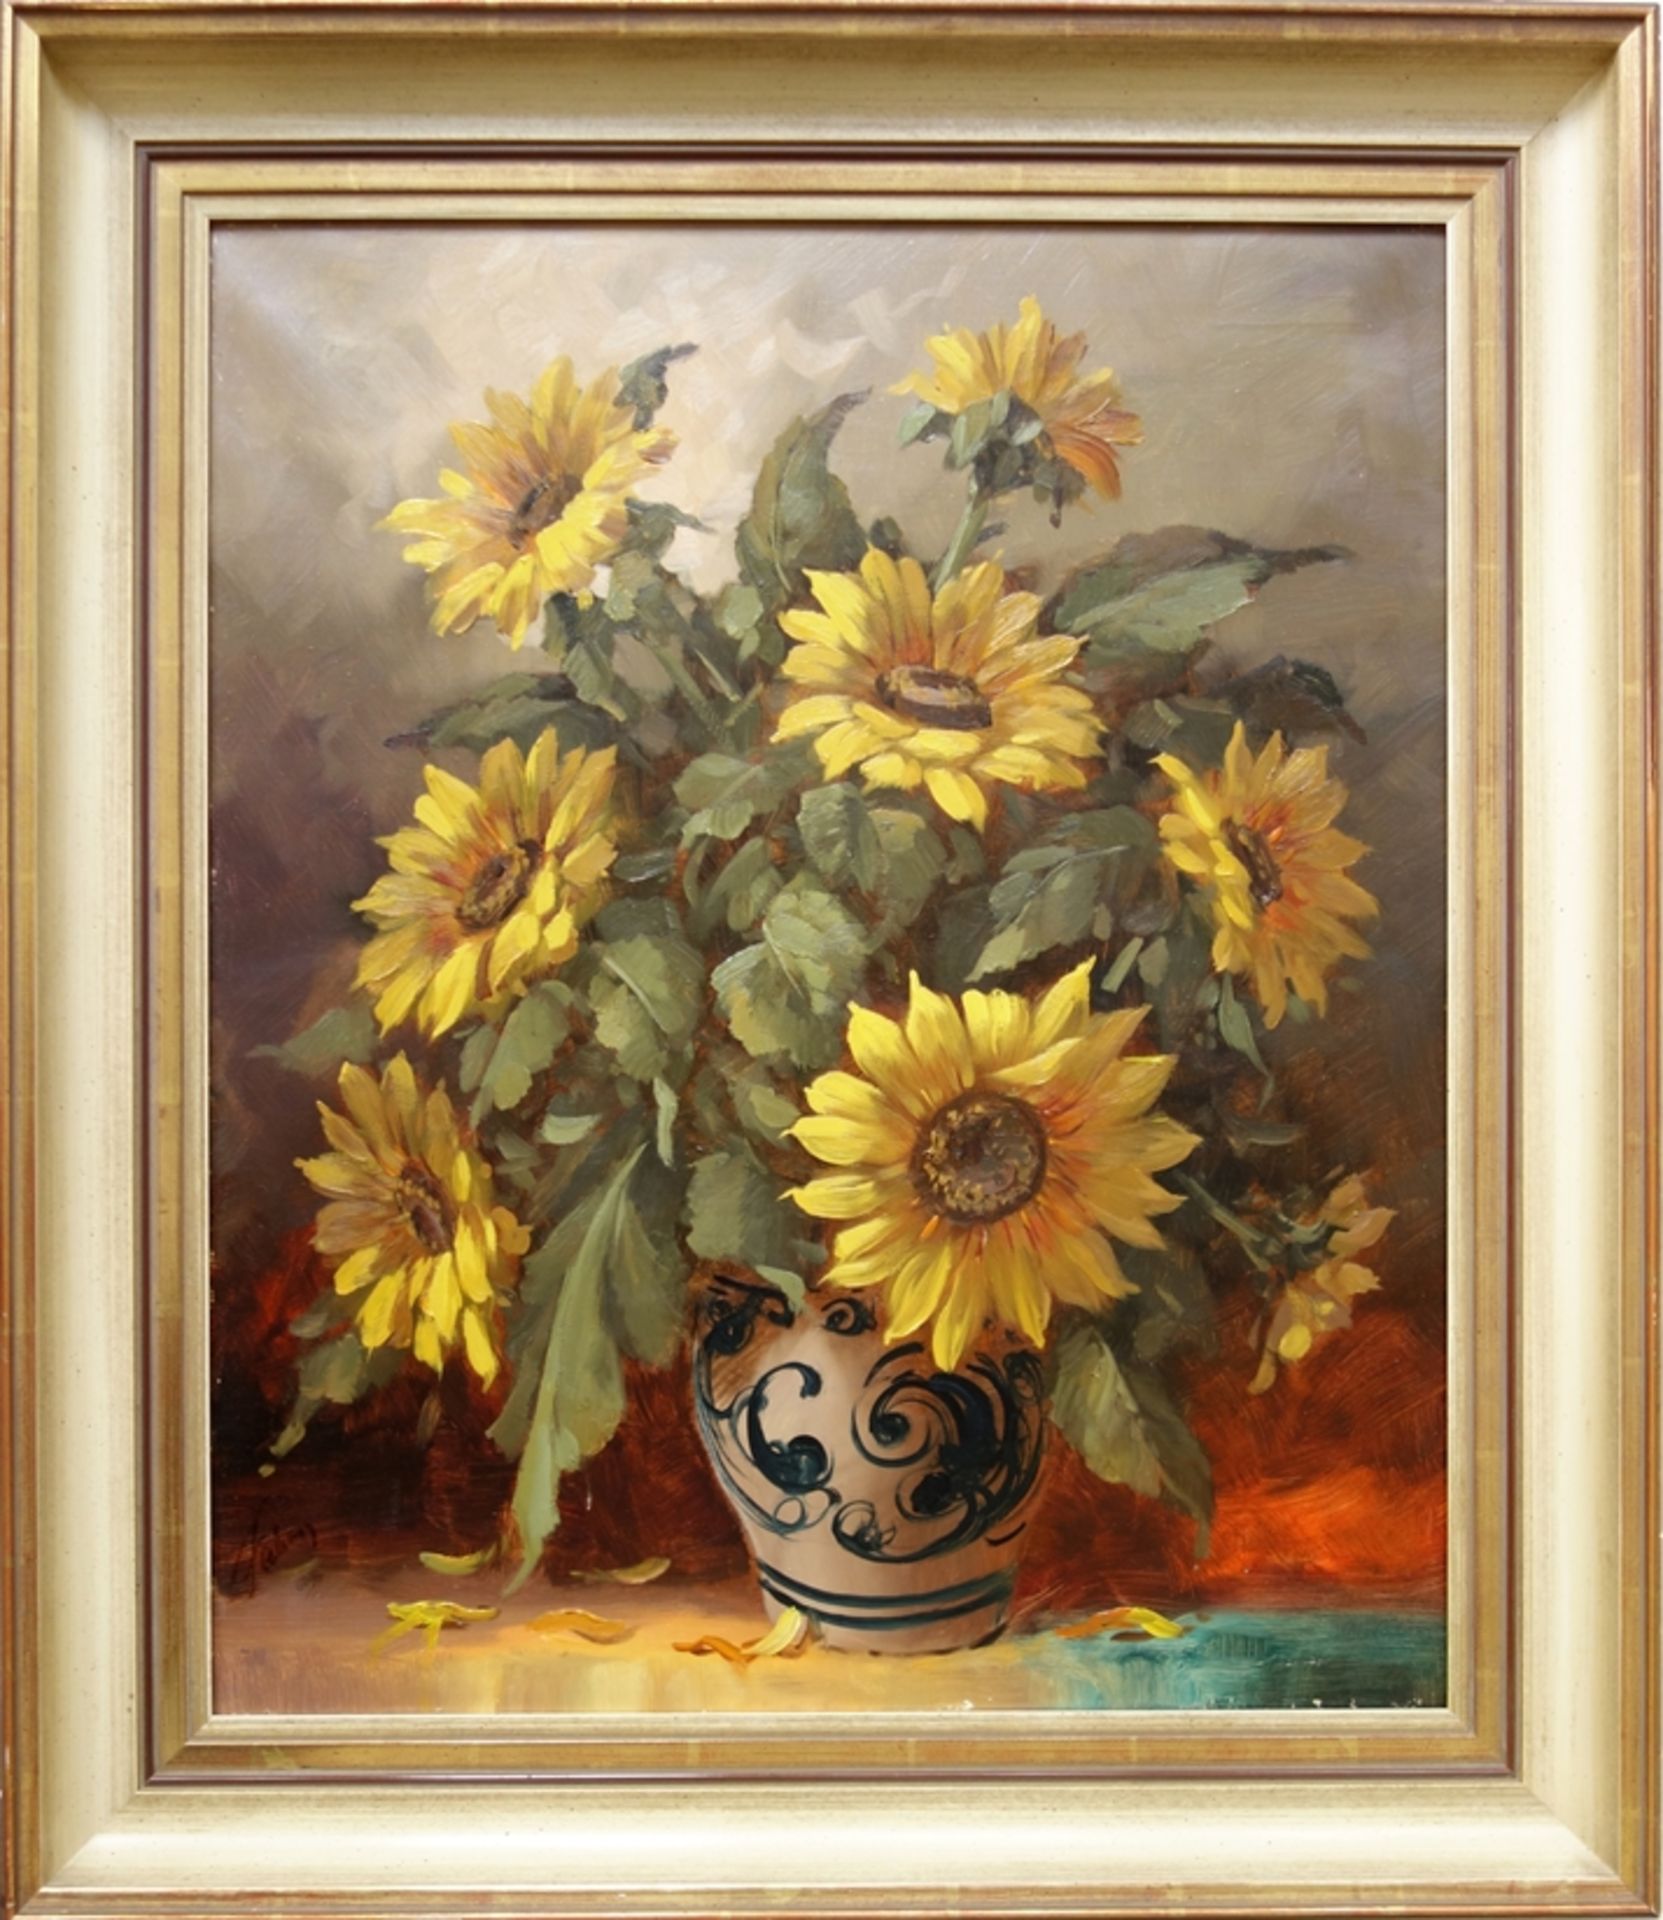 indistinctly signed, "Sunflowers in Westerwald Jug", c. 1960, oil/canvas